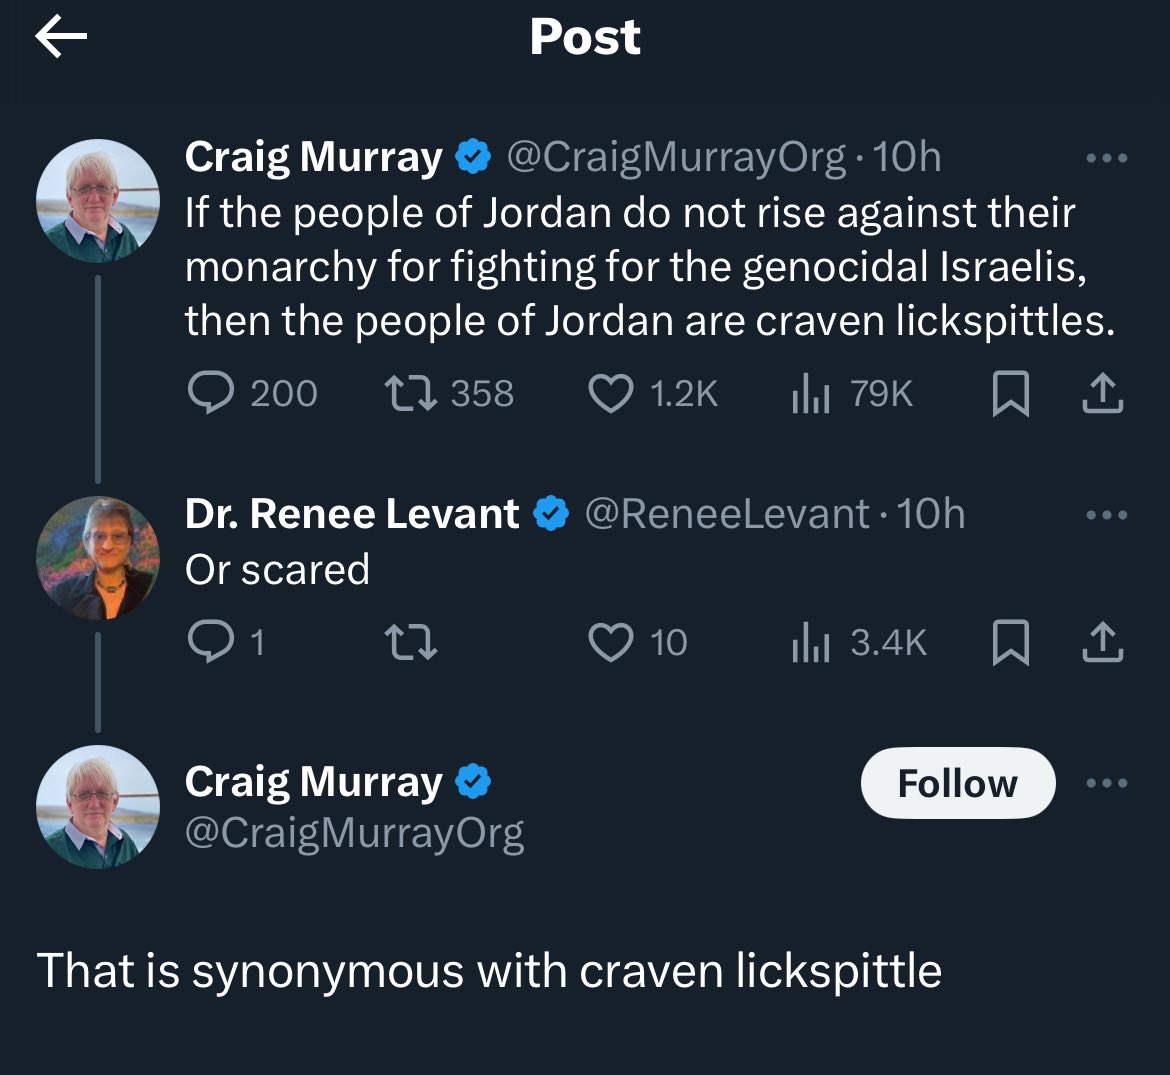 Man from Britain who can express any political view with absolutely no threat of harm calls people in an autocracy “craven lickspittles” for not openly opposing their government. Imagine being this much of a cvnt.